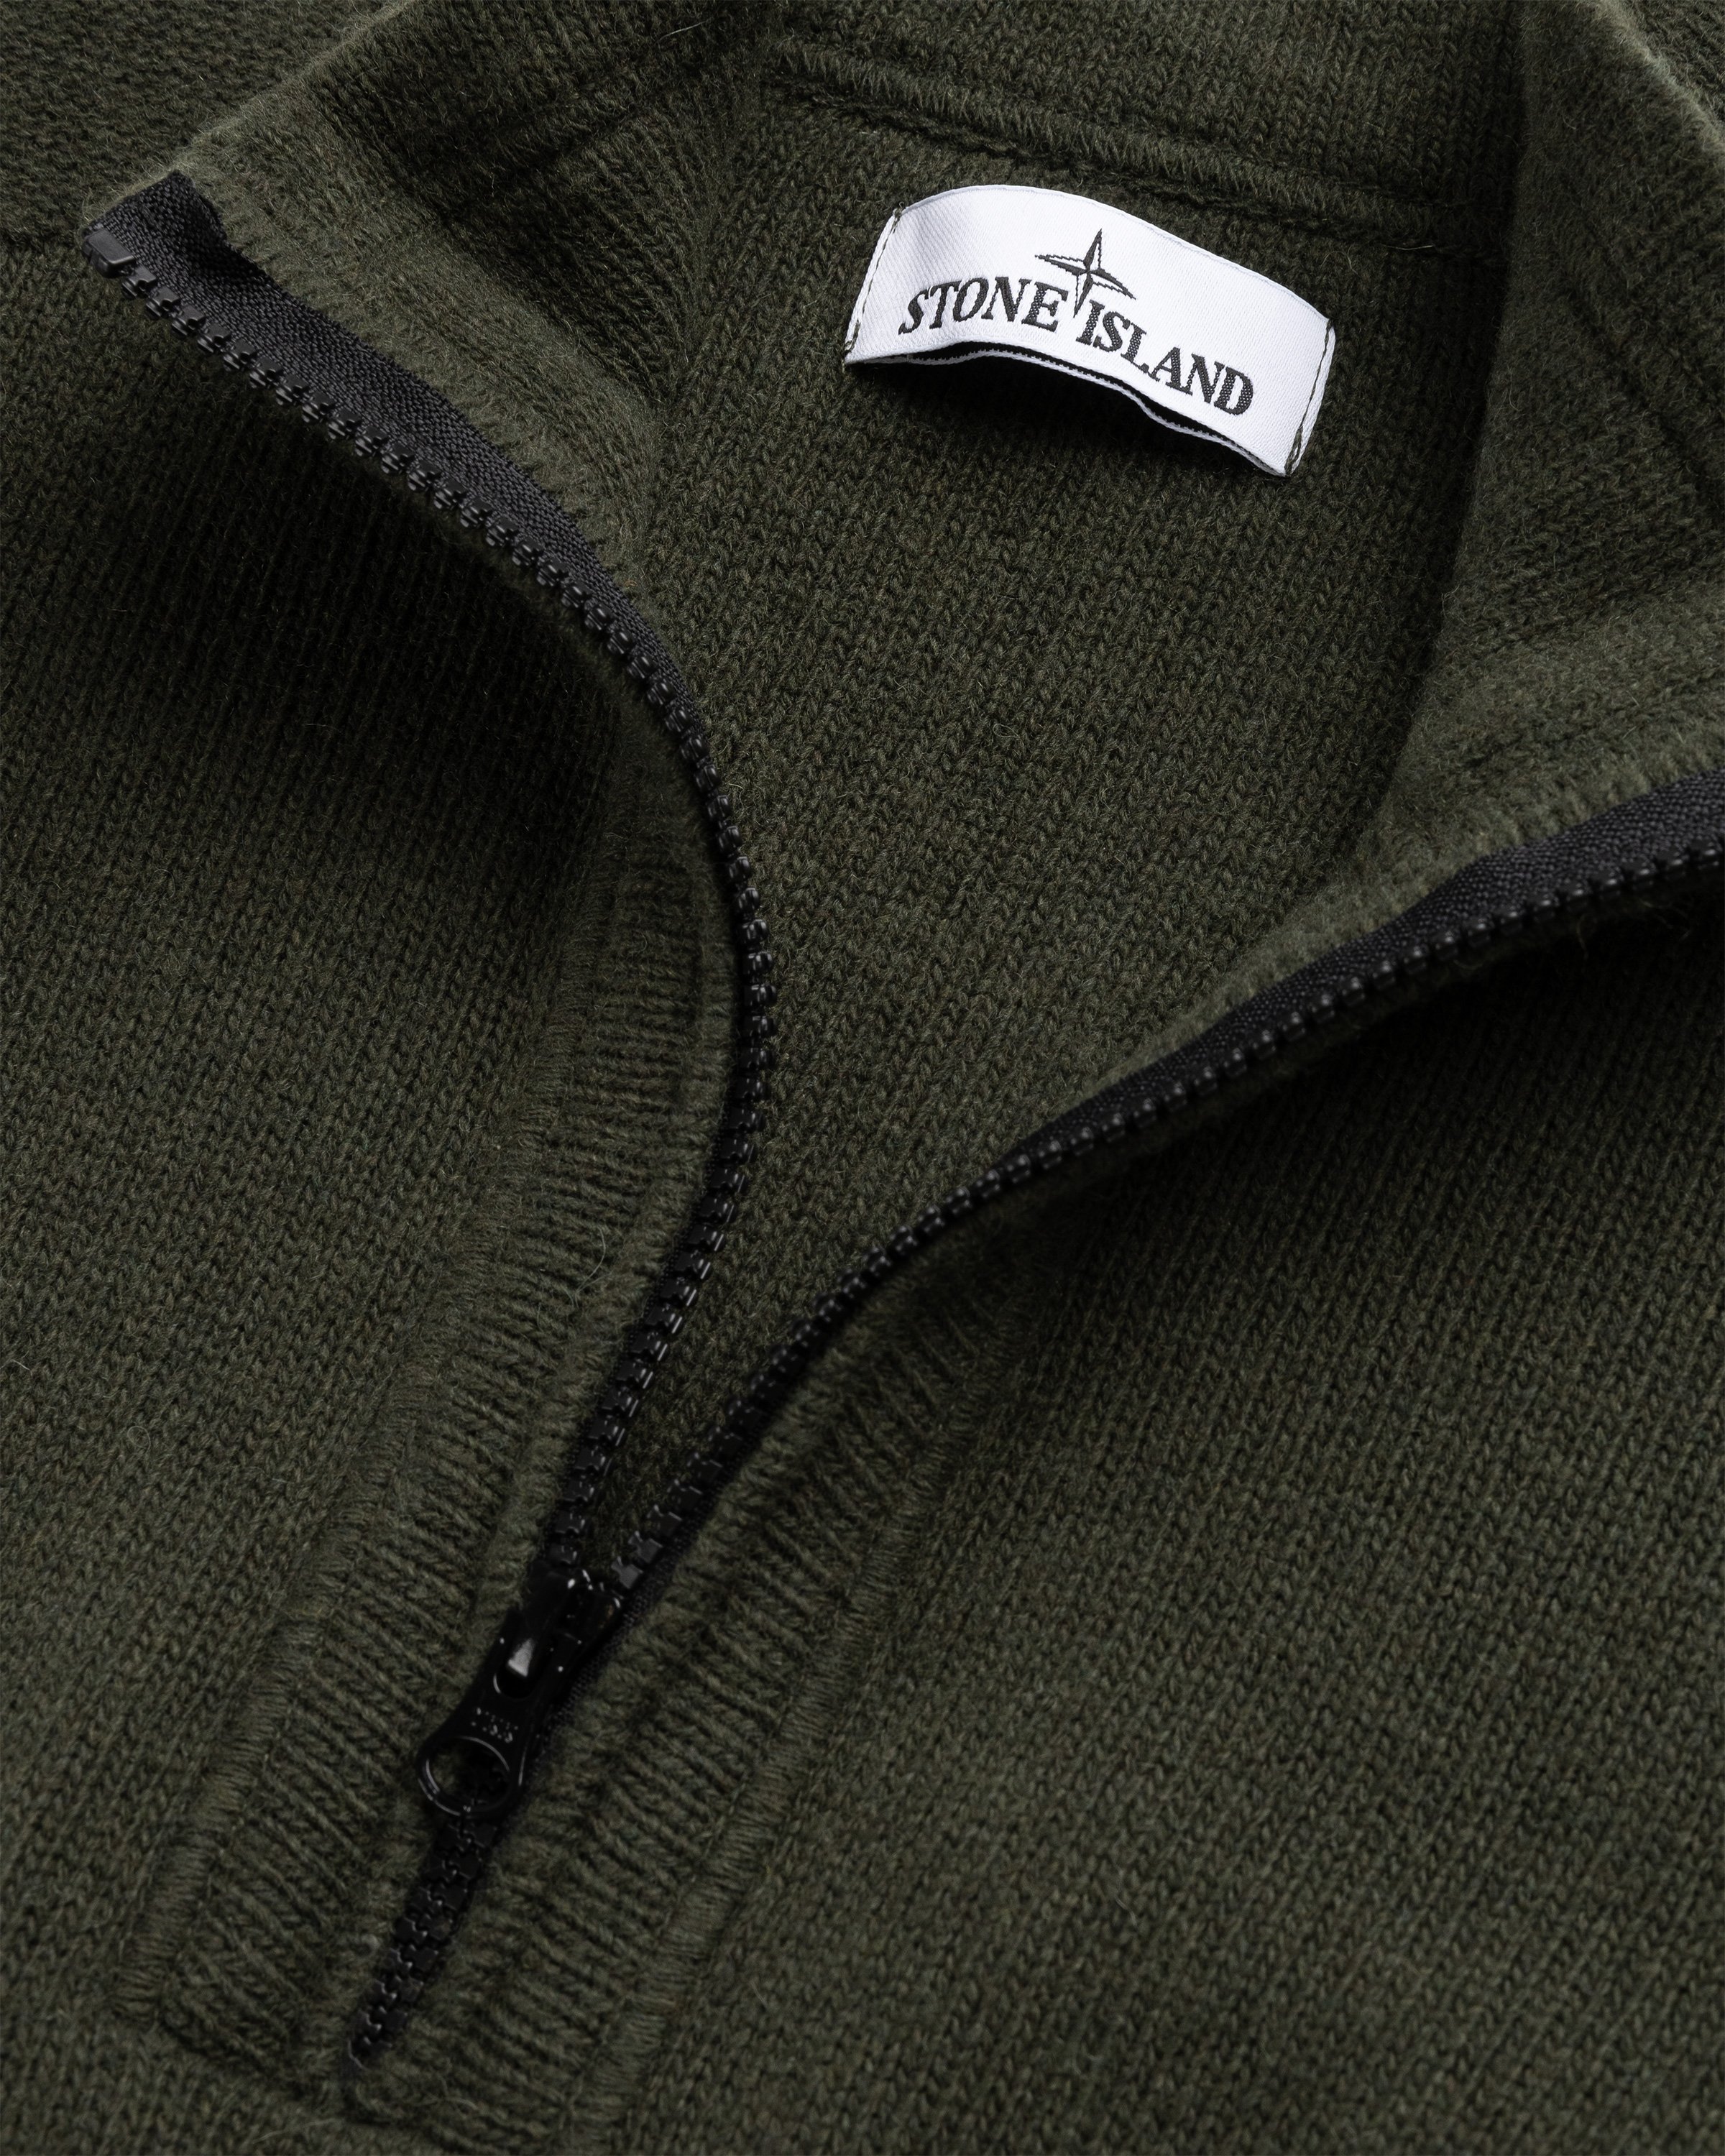 Stone Island - Lambswool Half-Zip Knit Olive - Clothing - Green - Image 5